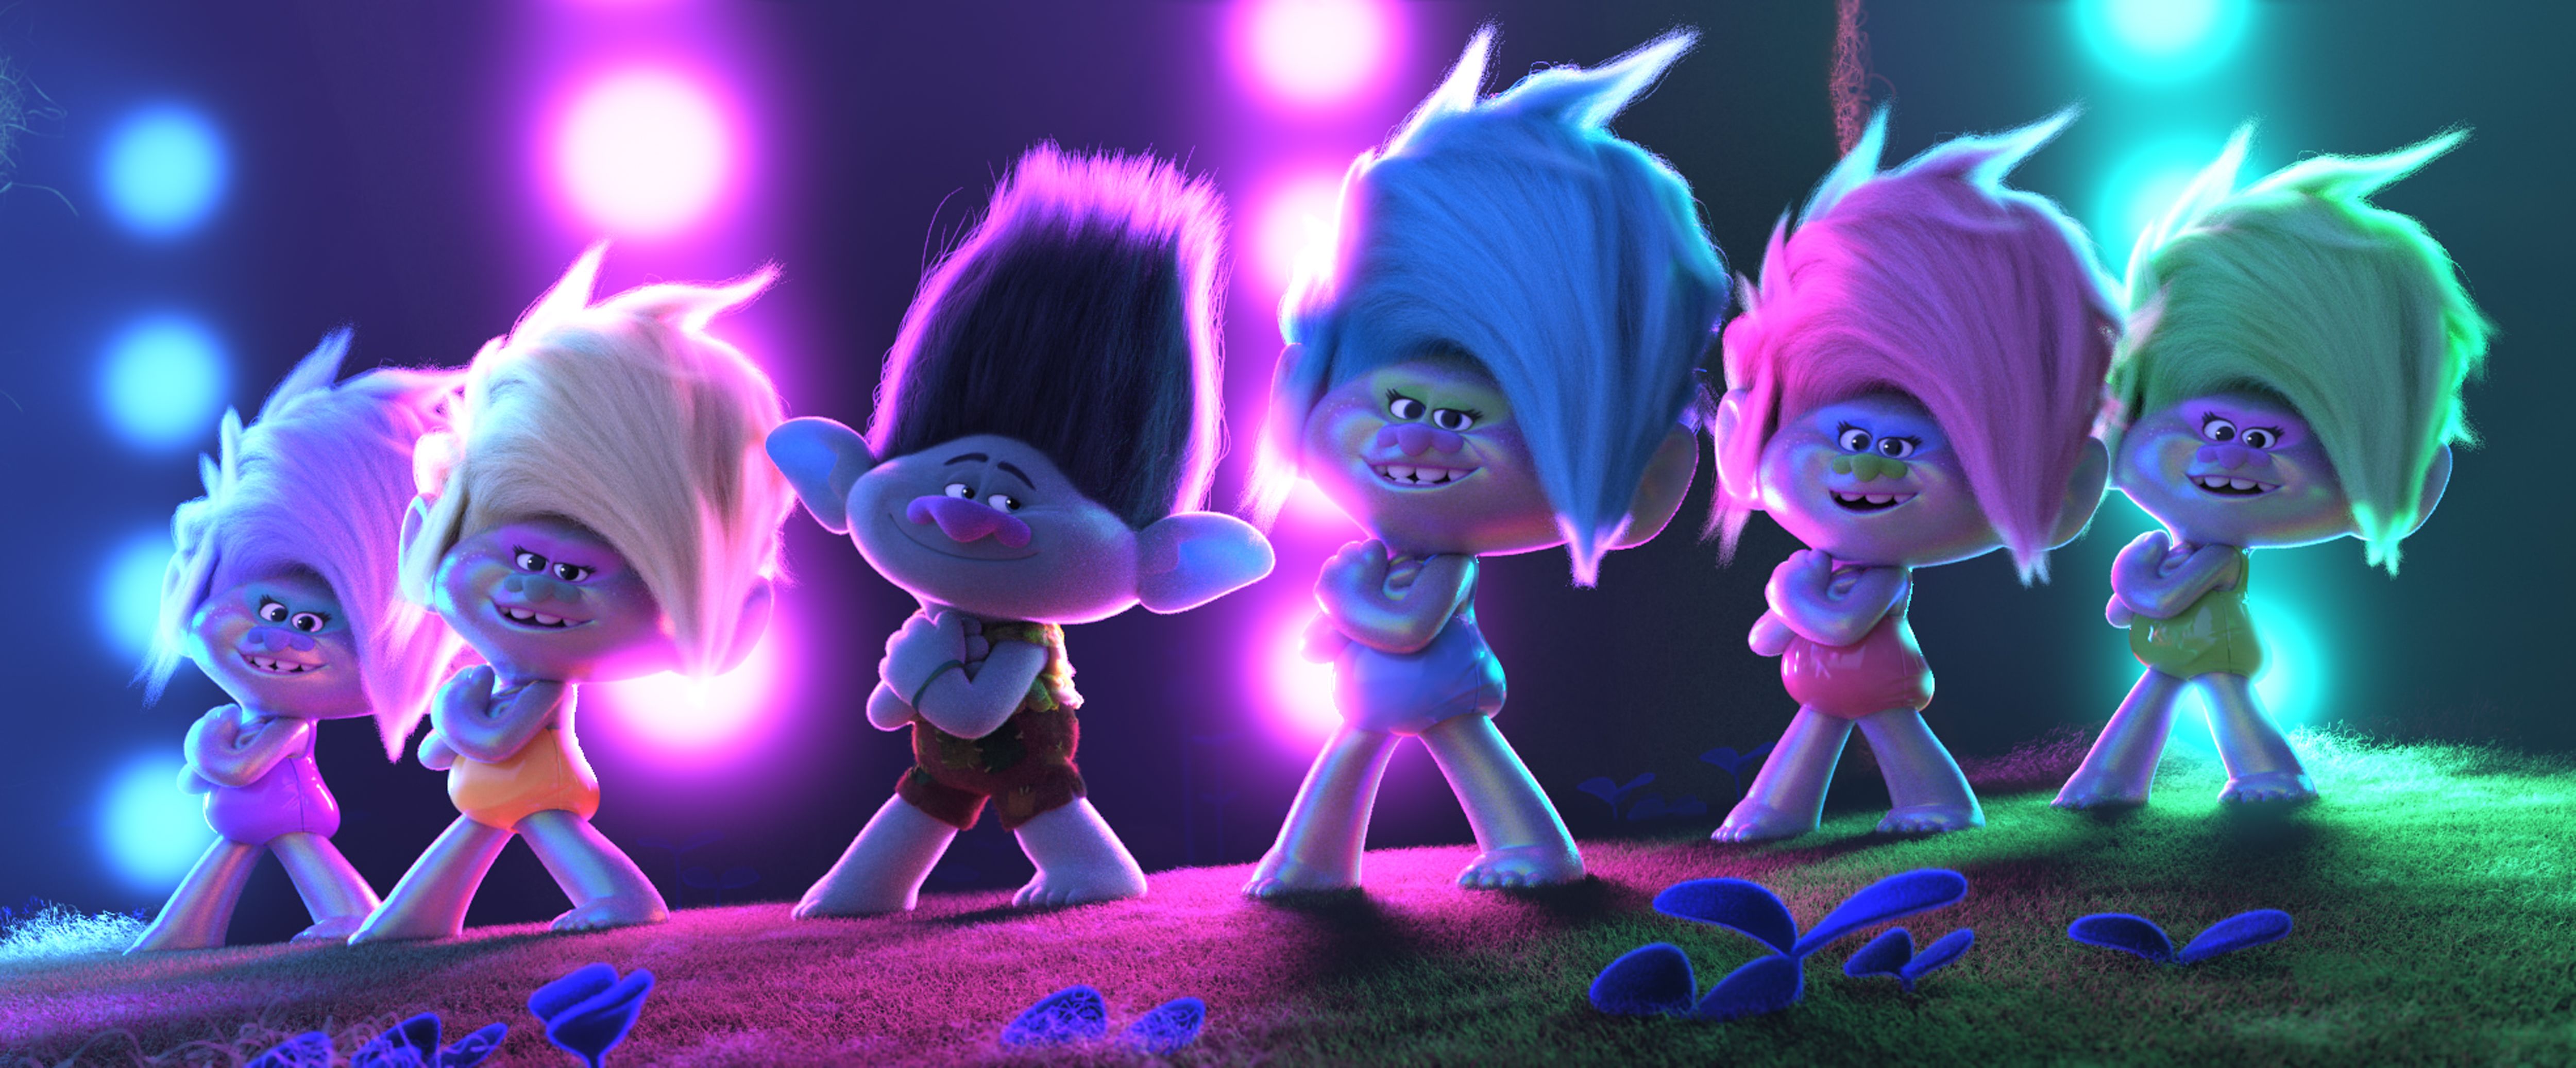 Trolls World Tour' isn't good. But it would still be more fun in a theater